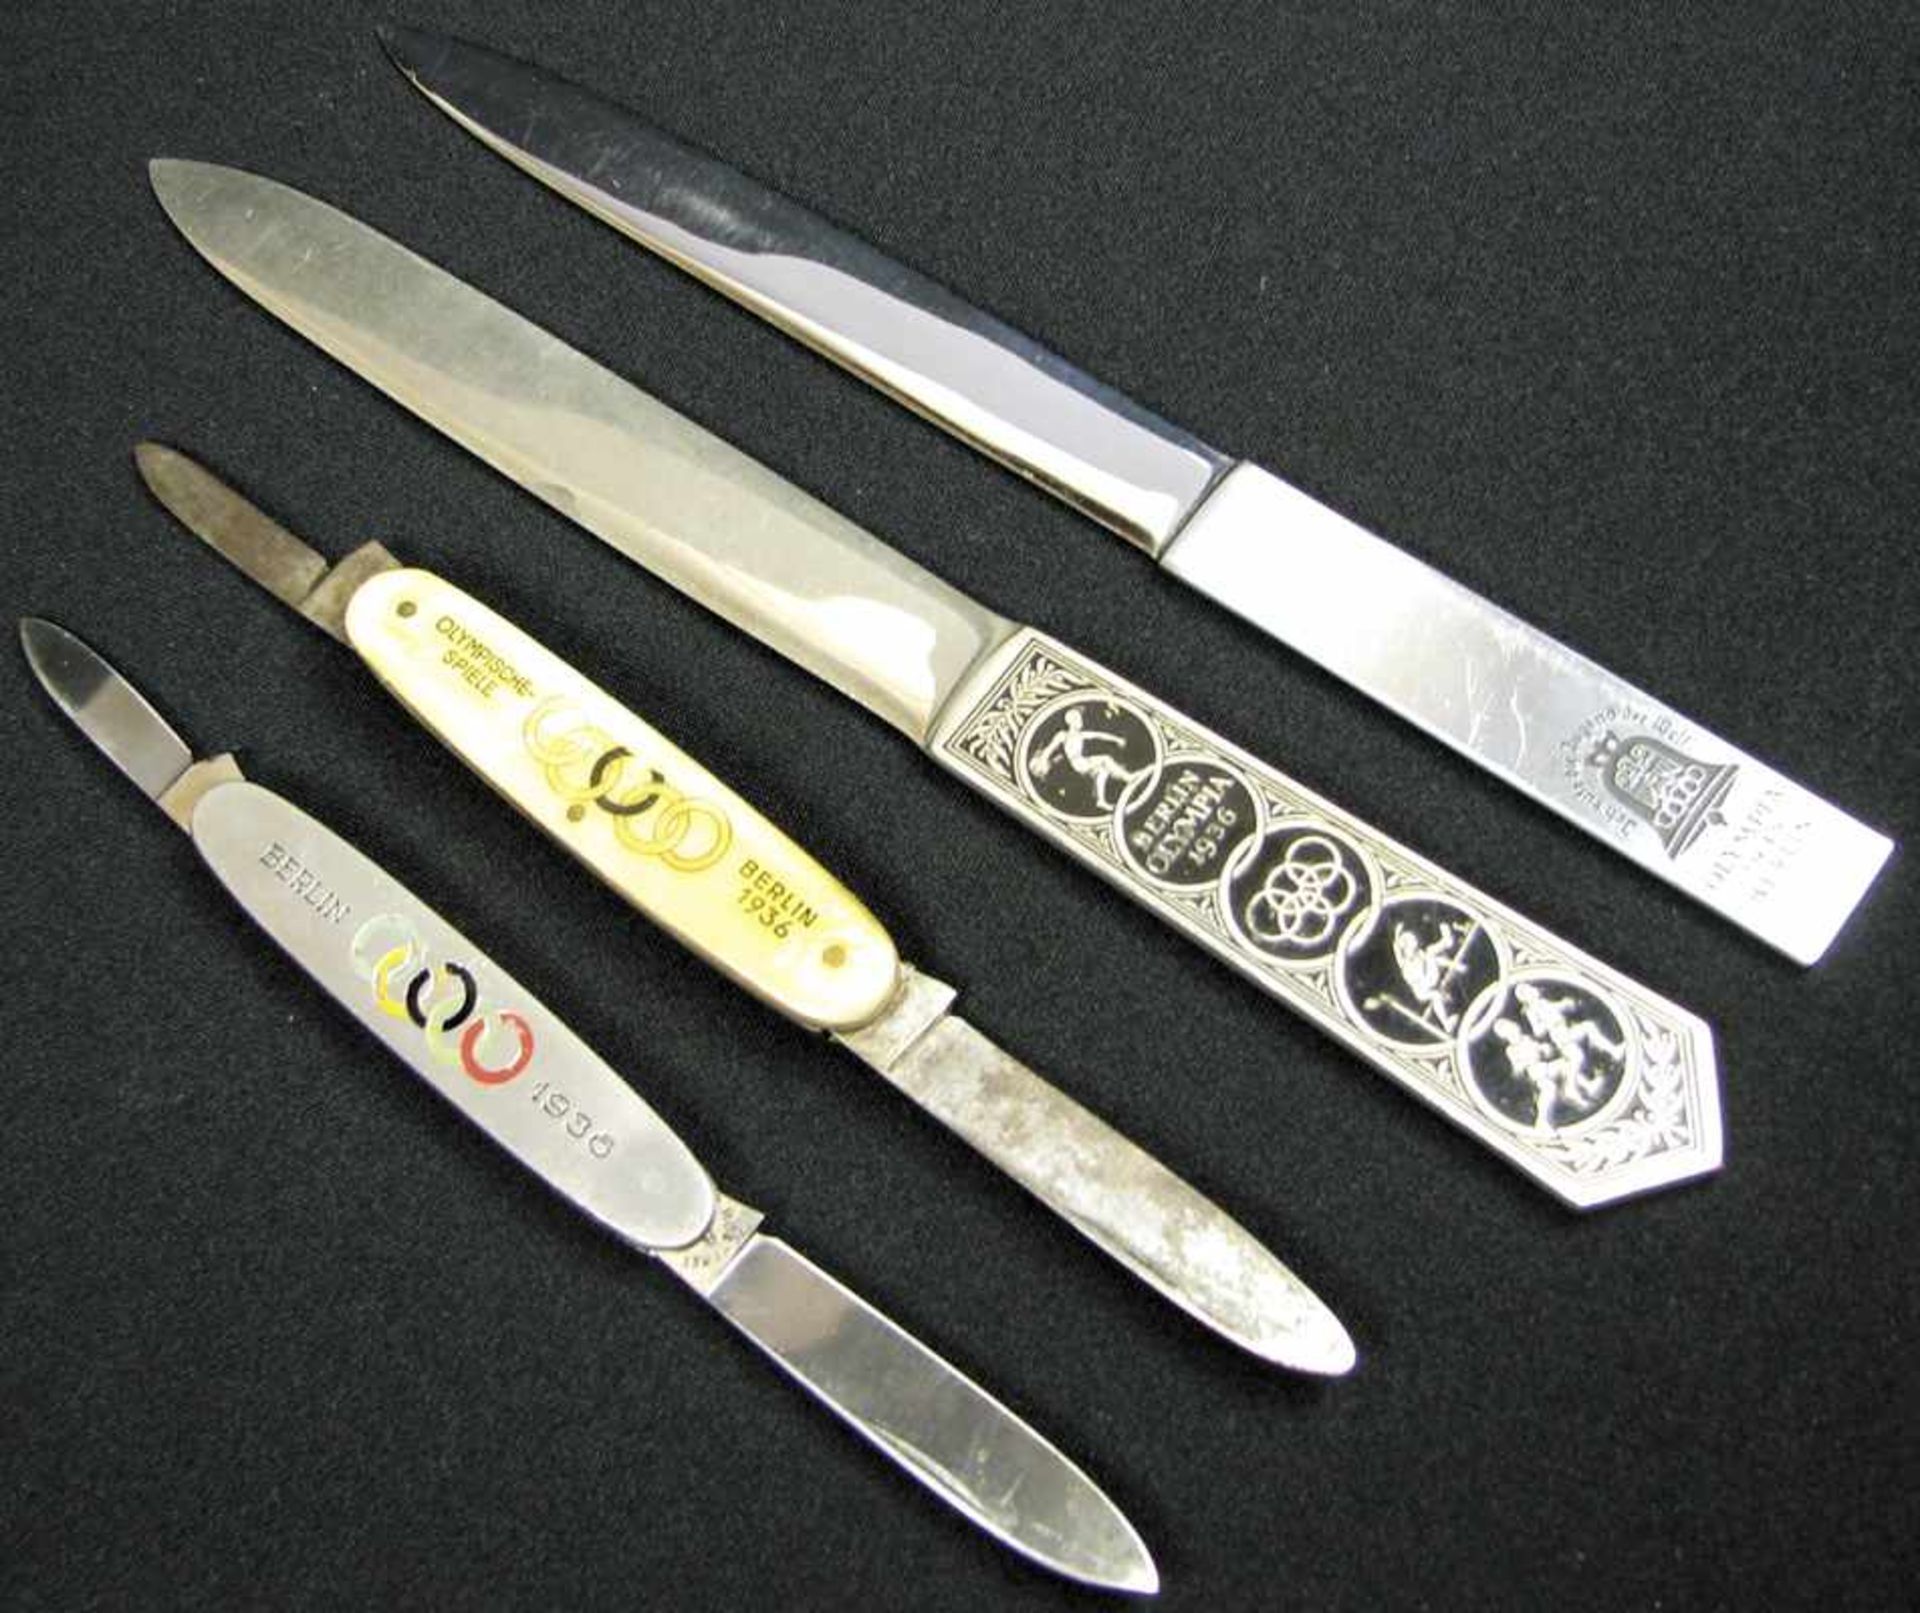 Olympic Games 1936: 2 knifes, 2 letter openers - Souvenirs. Four objects: Two pocket knives, each